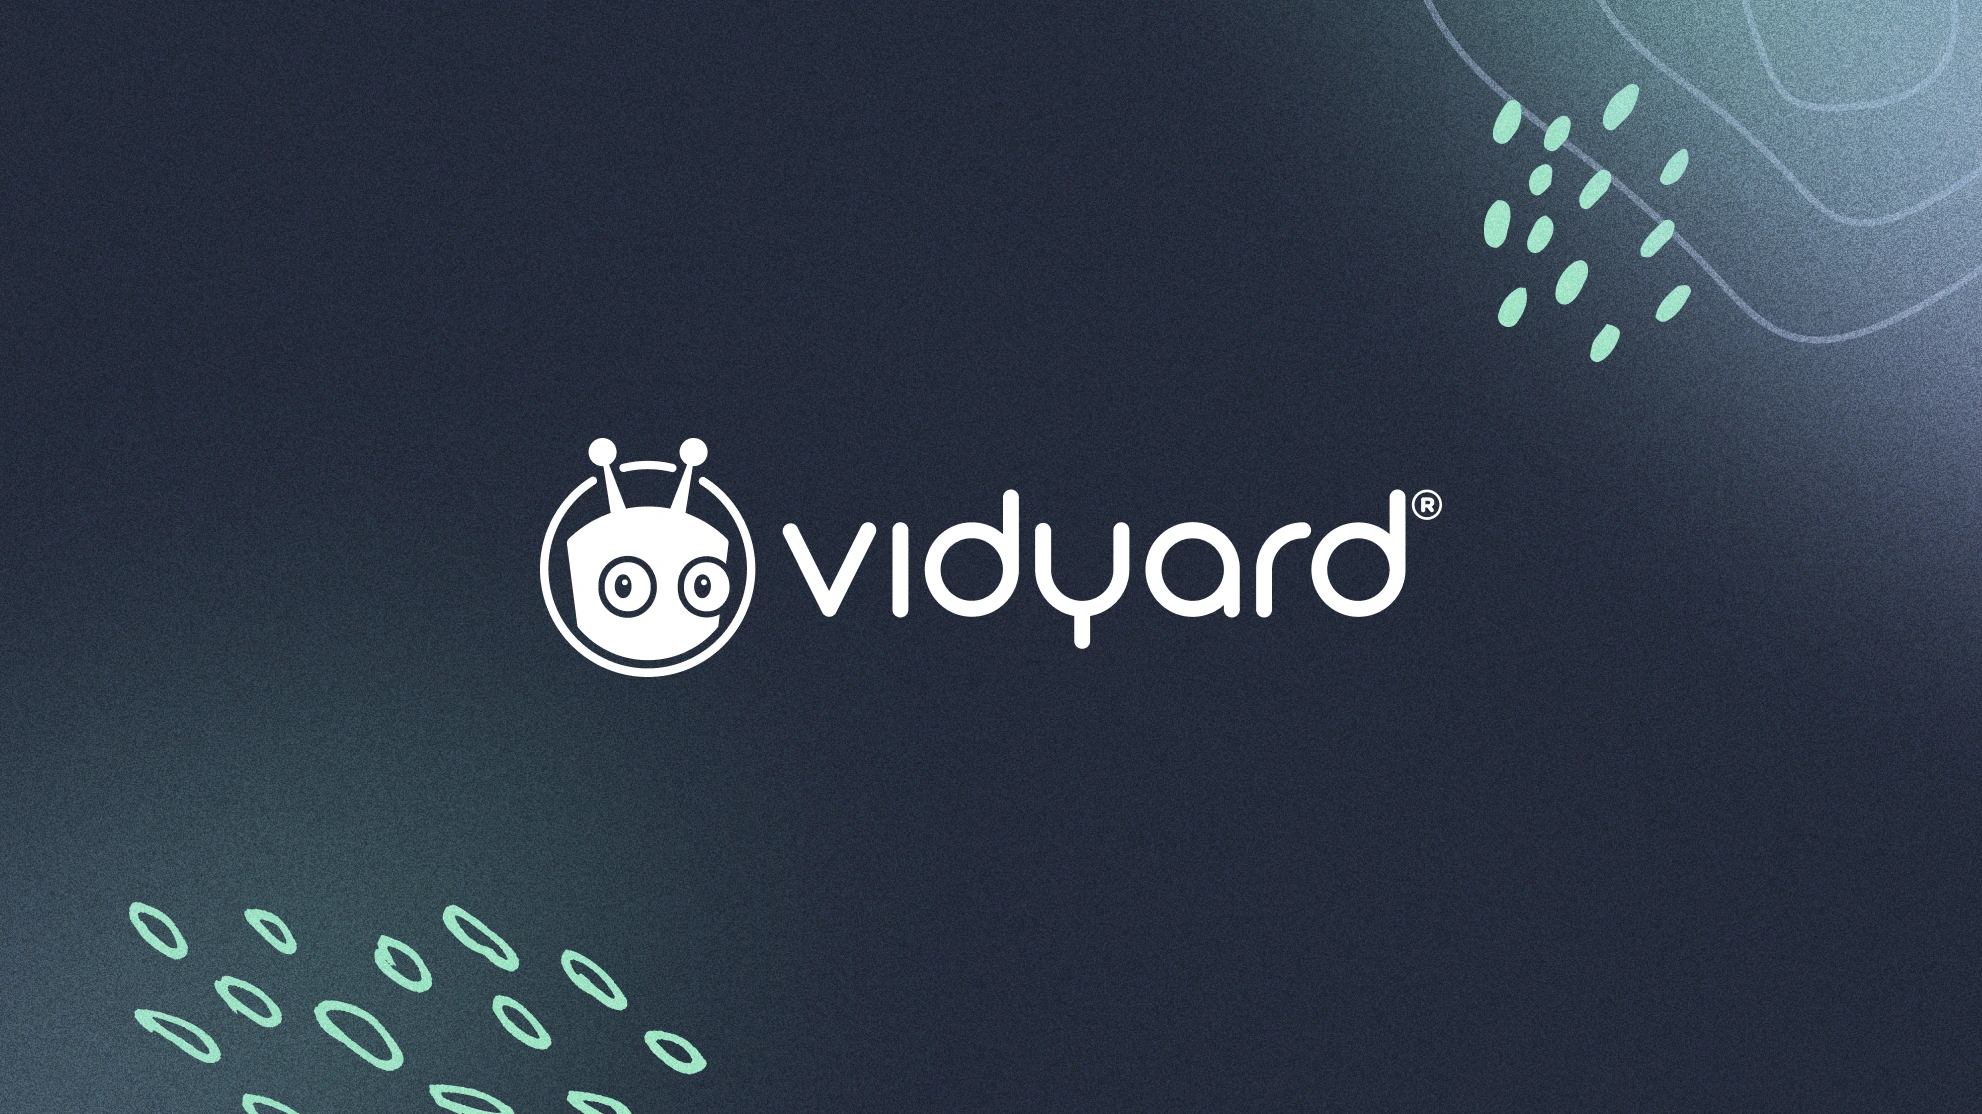 Vidyard Enables Marketers to Create Custom-Branded Video Channel Experiences